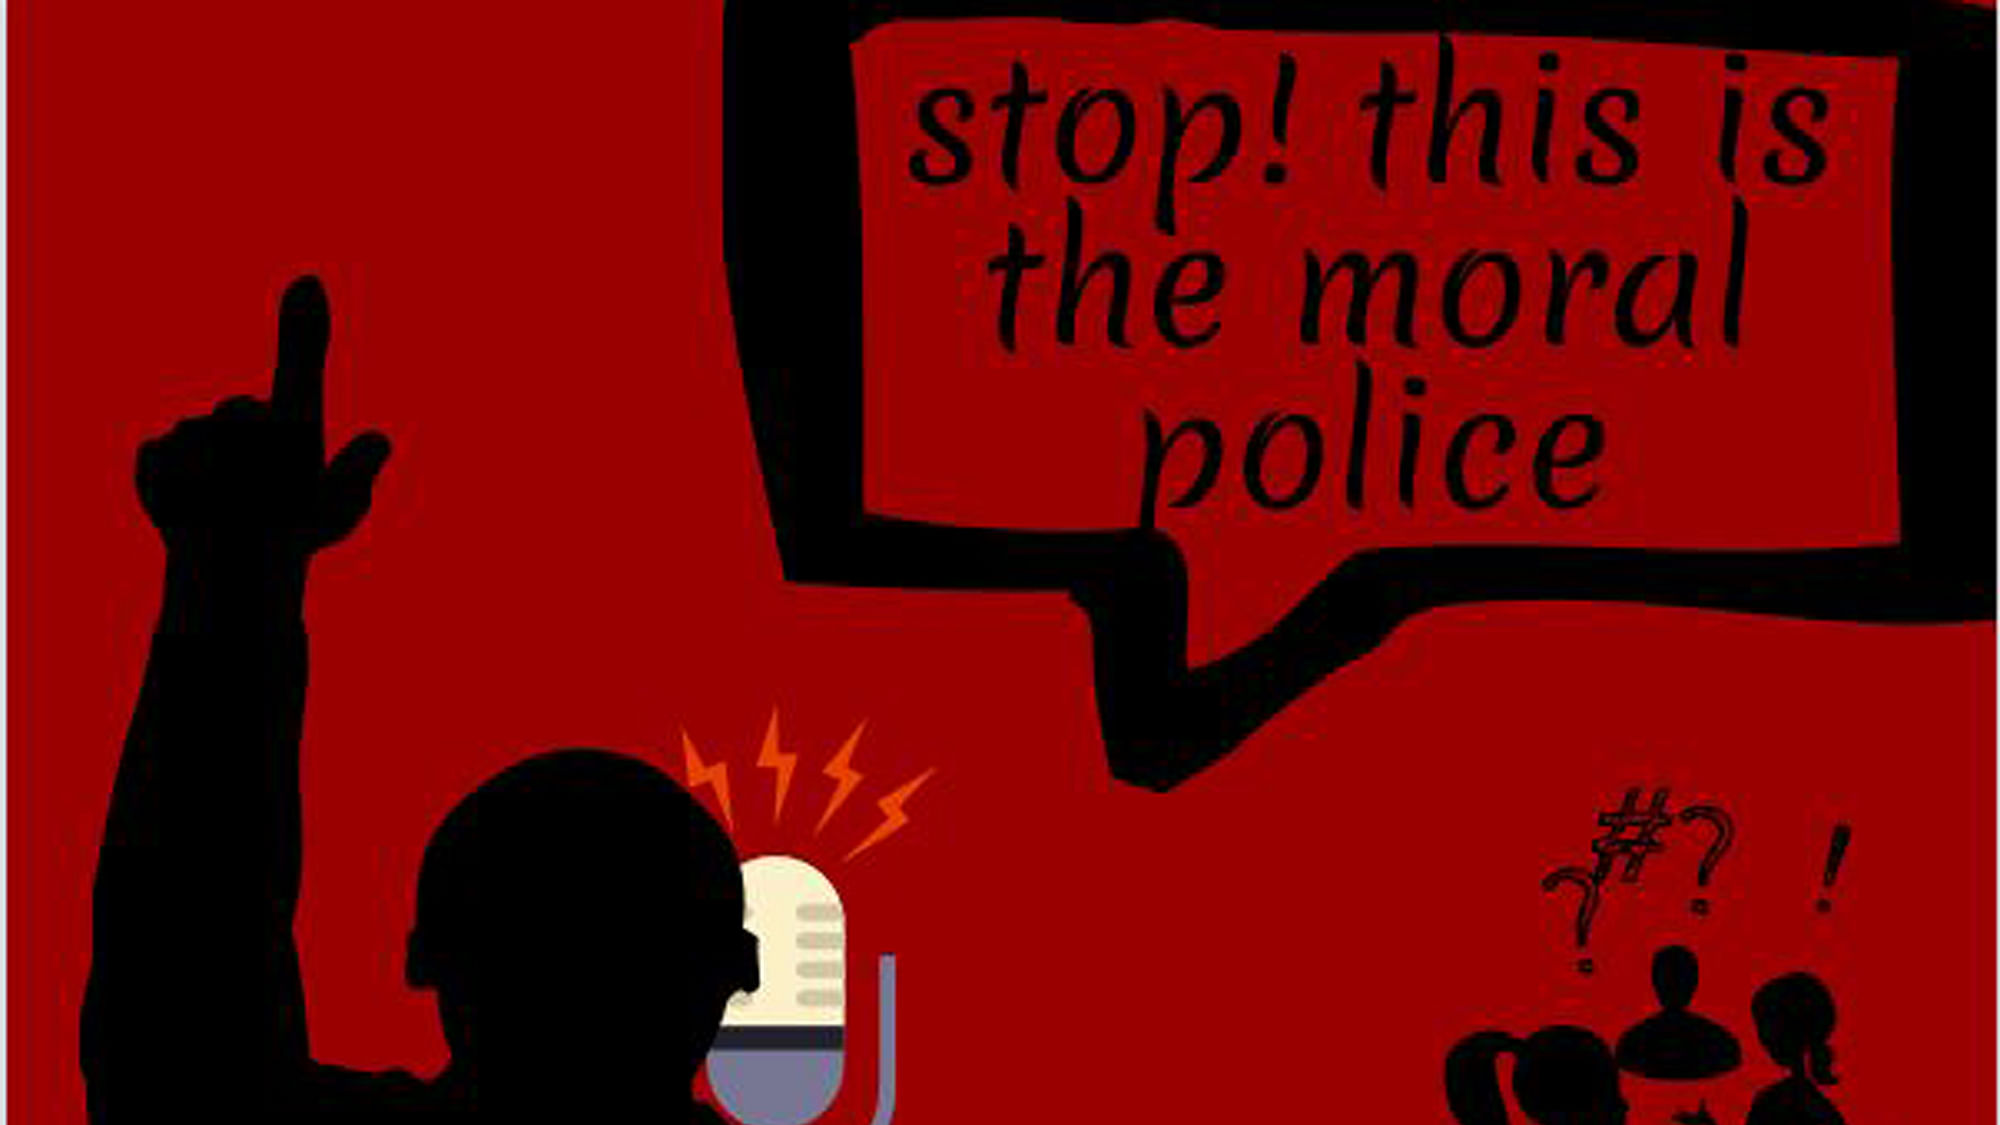 The Karnataka government has decided to act tough on those indulging in moral policing.